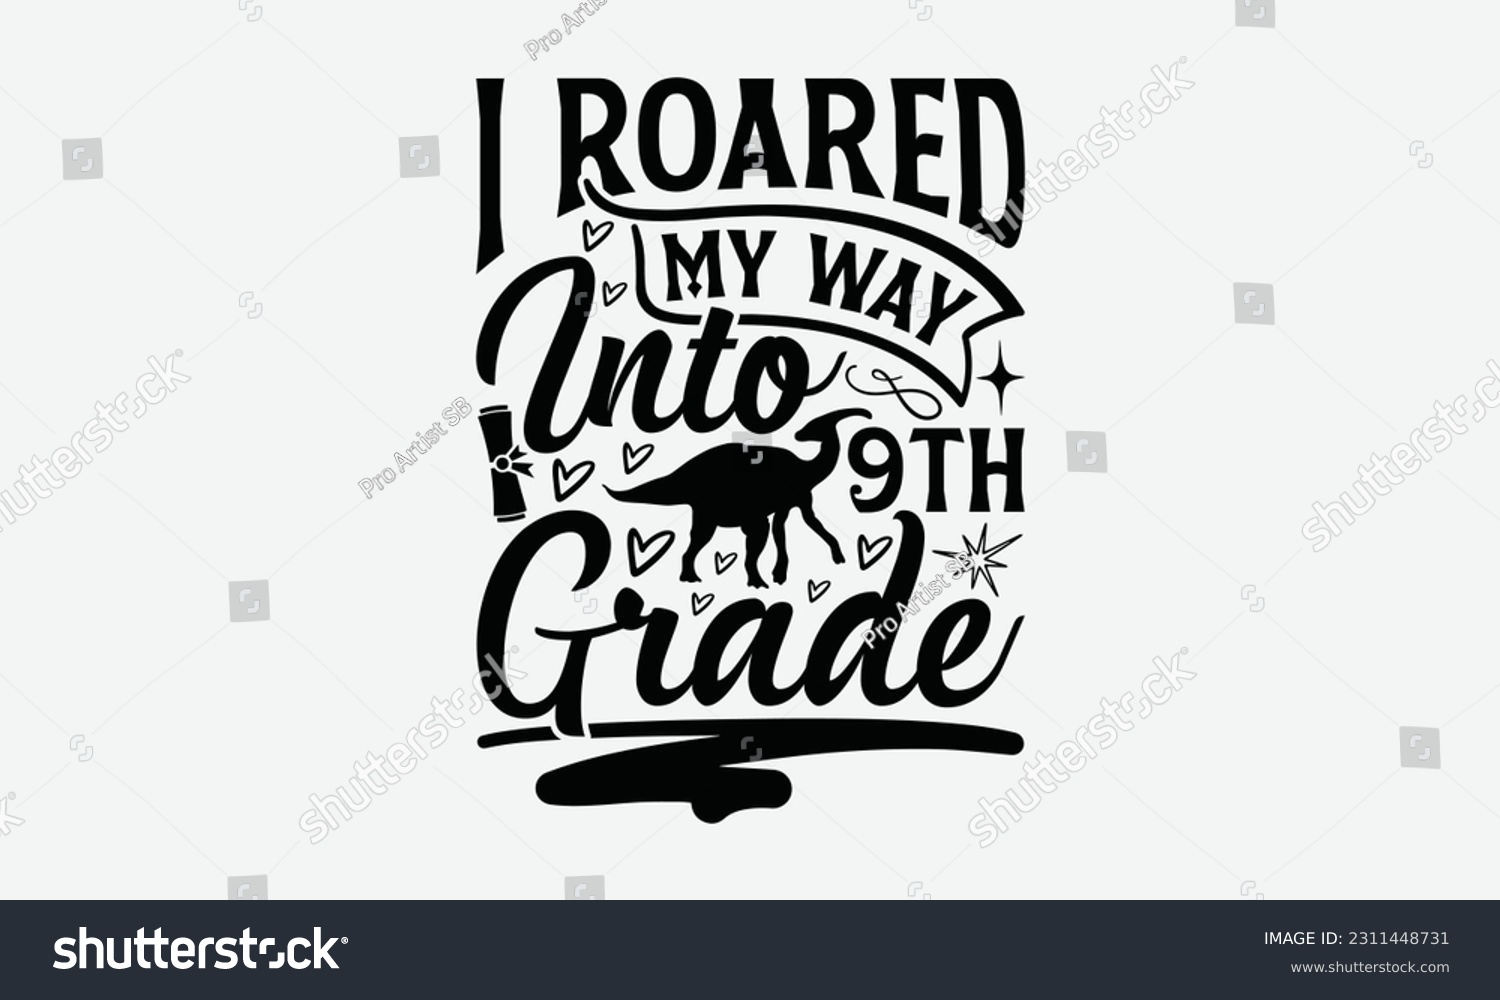 SVG of I Roared My Way Into 9th Grade - Dinosaur SVG Design, Handmade Calligraphy Vector Illustration, And Greeting Card Template With Typography Text. svg